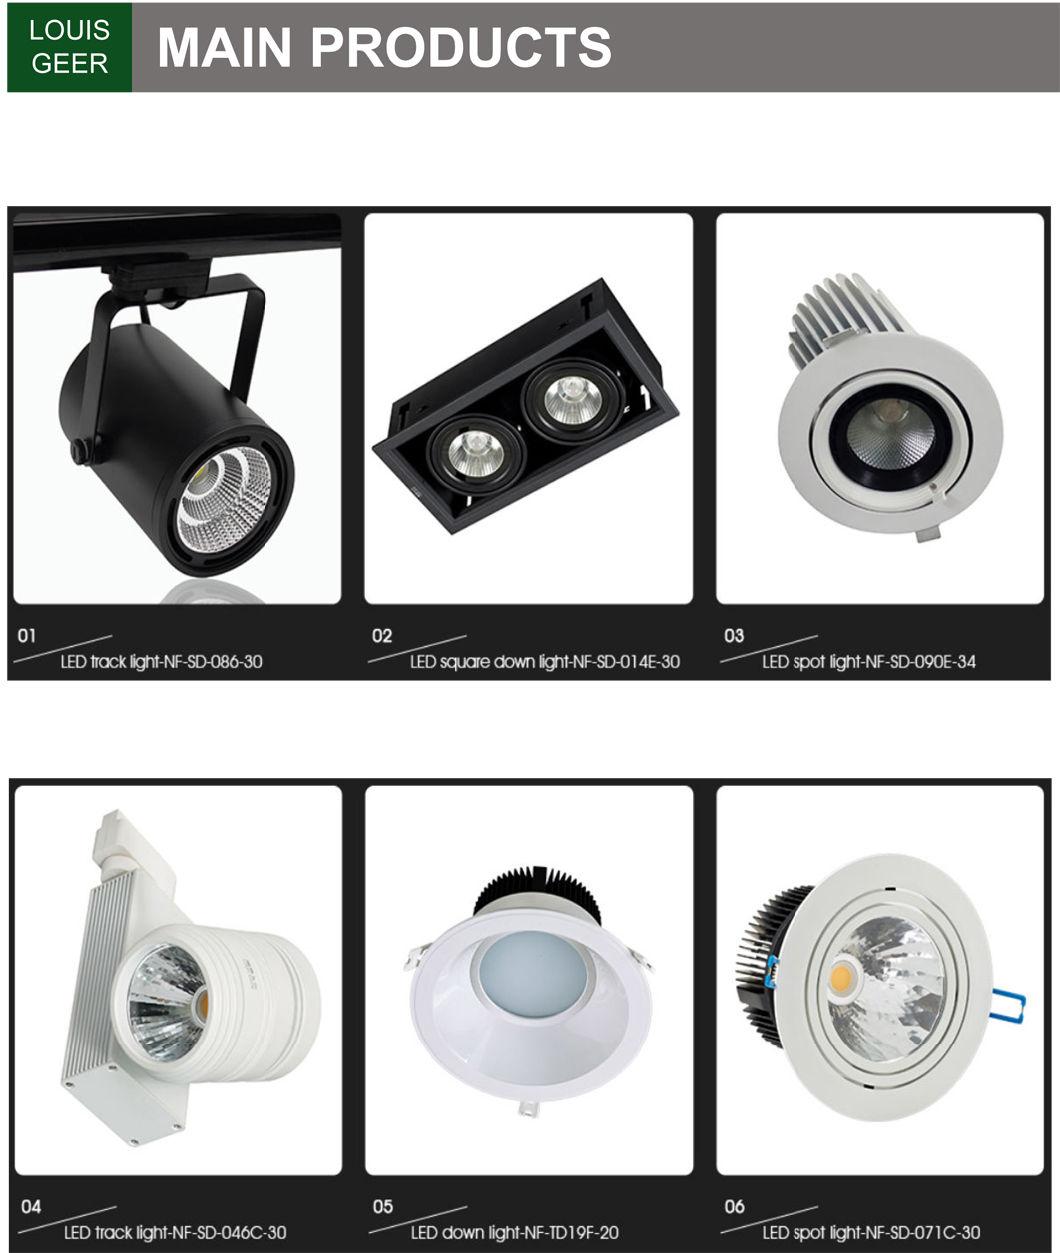 Louis Geer High Performance Aluminum 220V 12W 15W 18W Indoor Living Room Recessed LED Spot Light